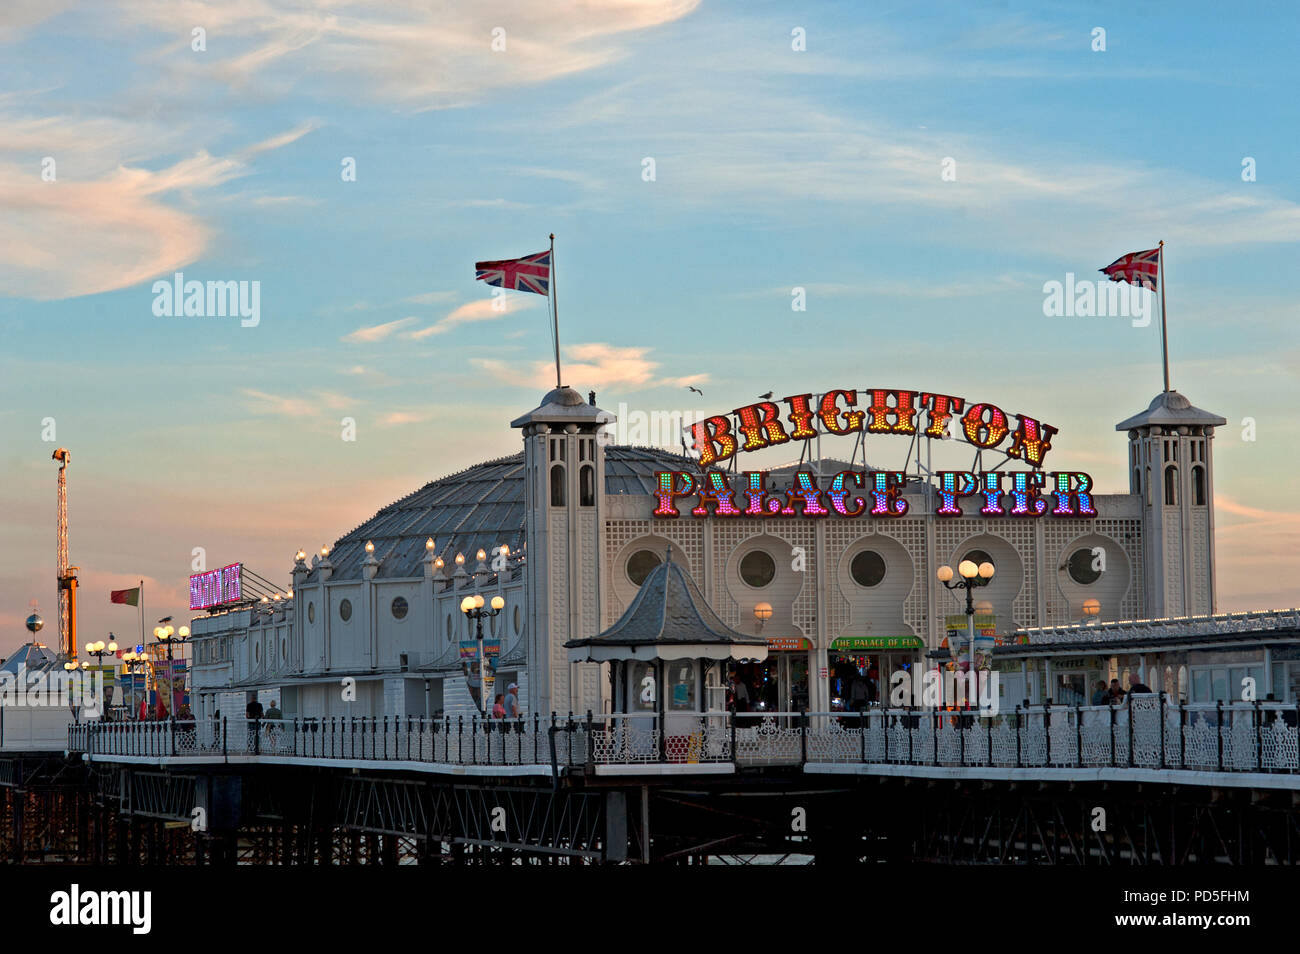 The famous Brighton Palace Pier on England's south coast changed its name in 2018 to Brighton Palace Pier, a combination of its two previous names. Stock Photo